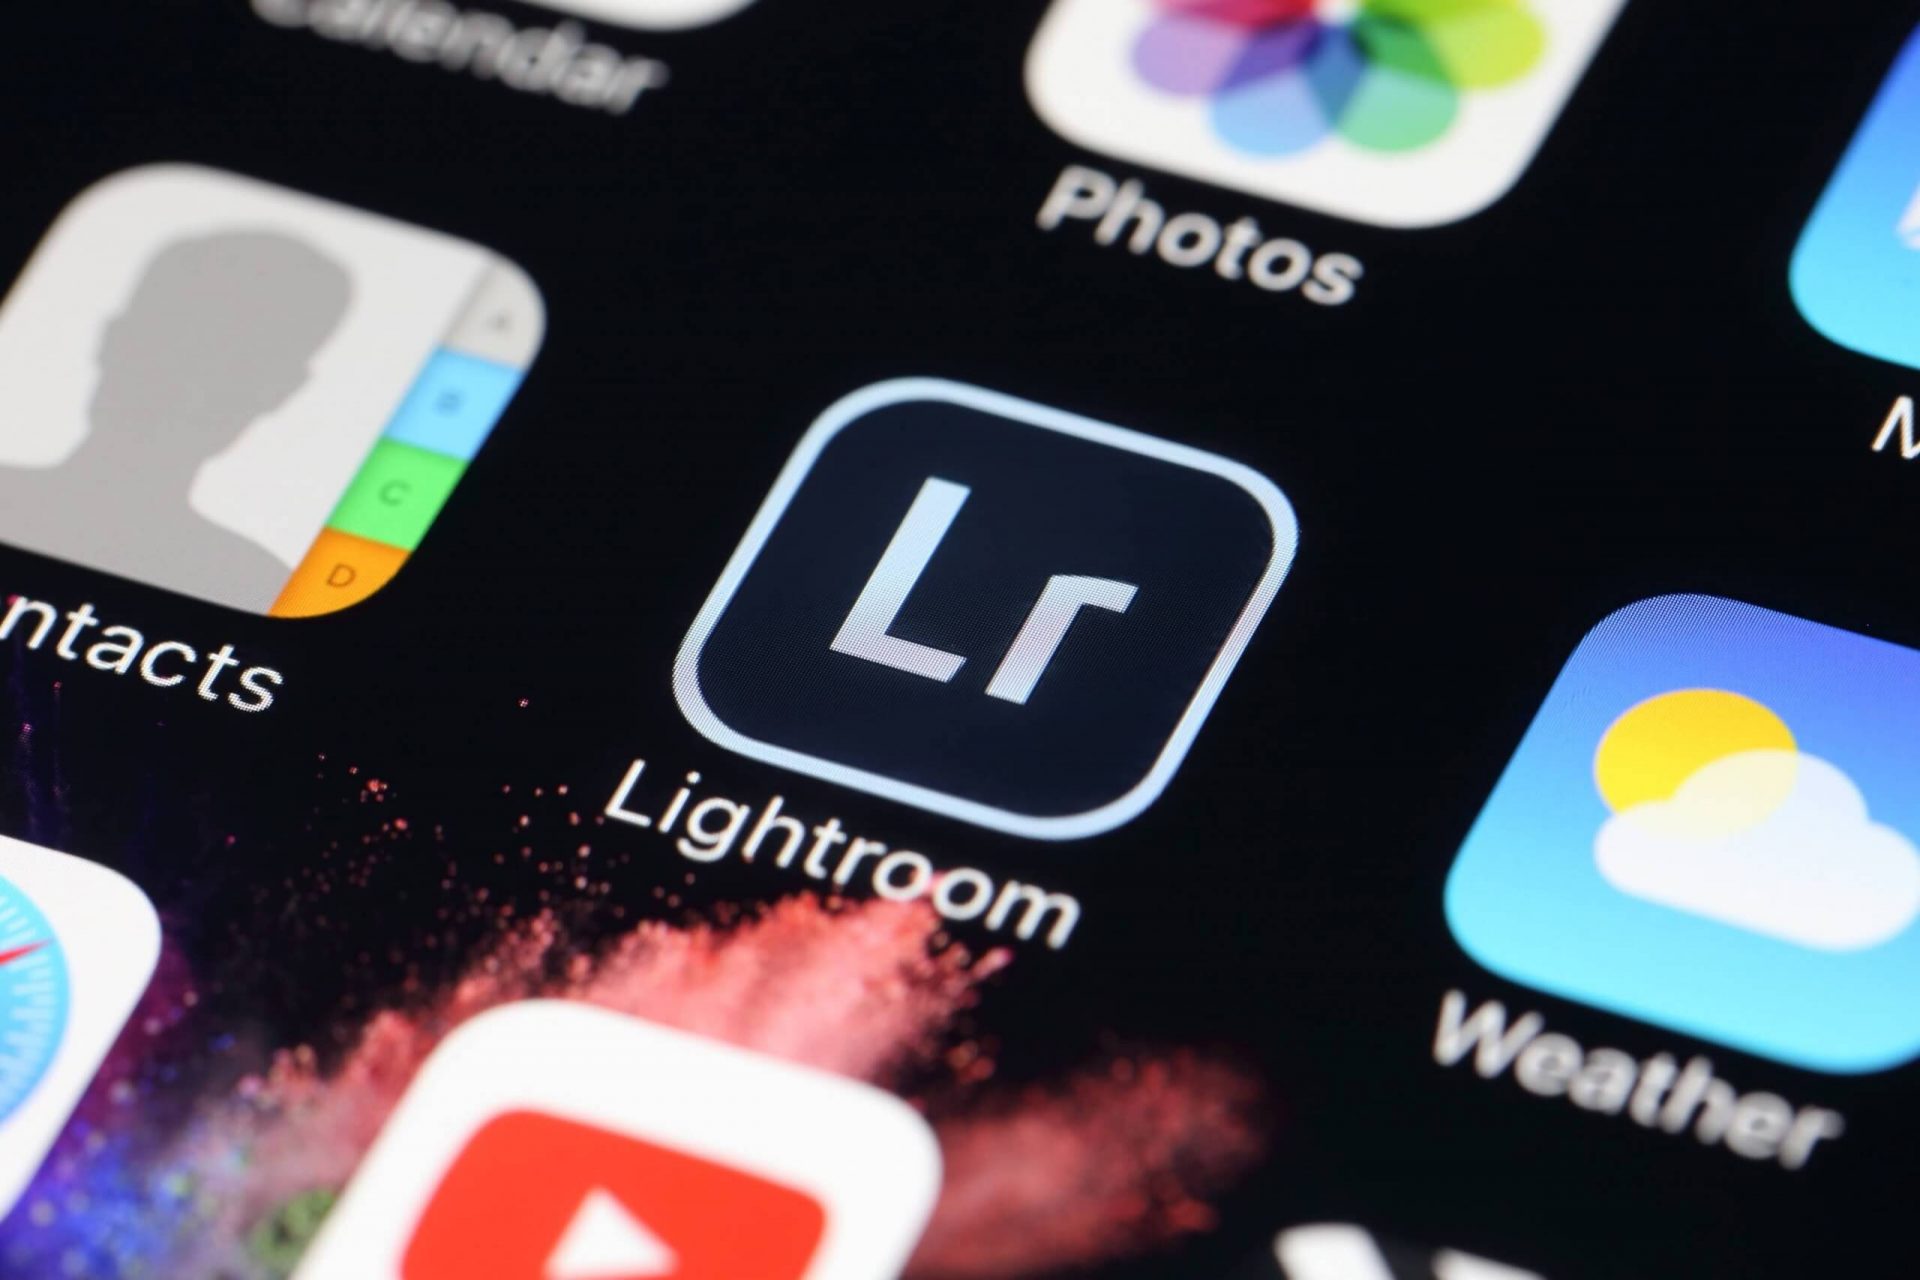 Most modern Lightroom update for iOS wiped all unsynced photography and presets